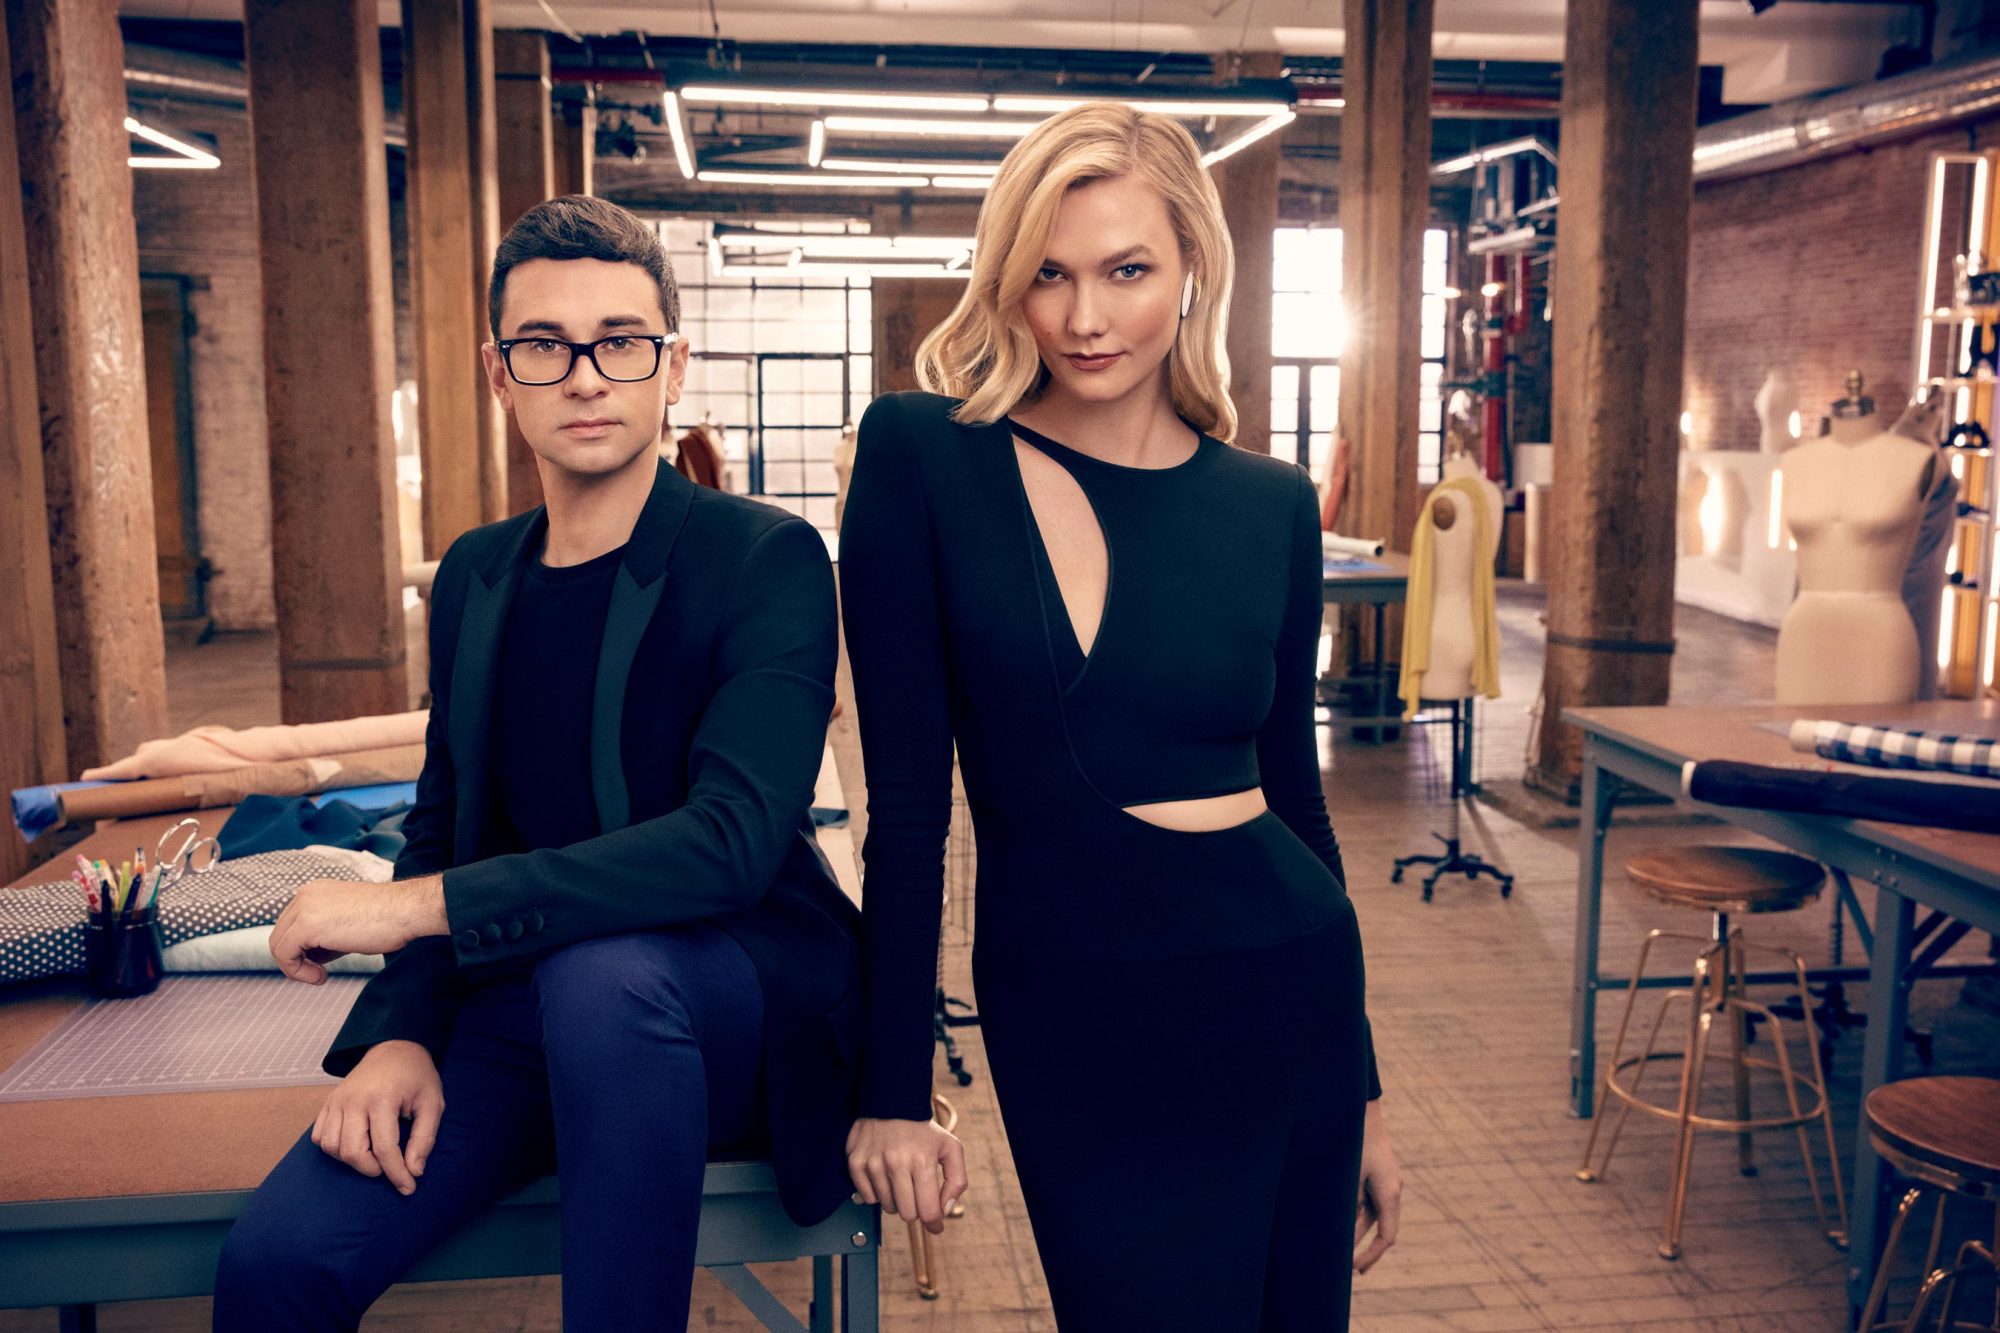 Karlie Kloss is 'excited to still be involved' in Project Runway as she steps back as full-time host